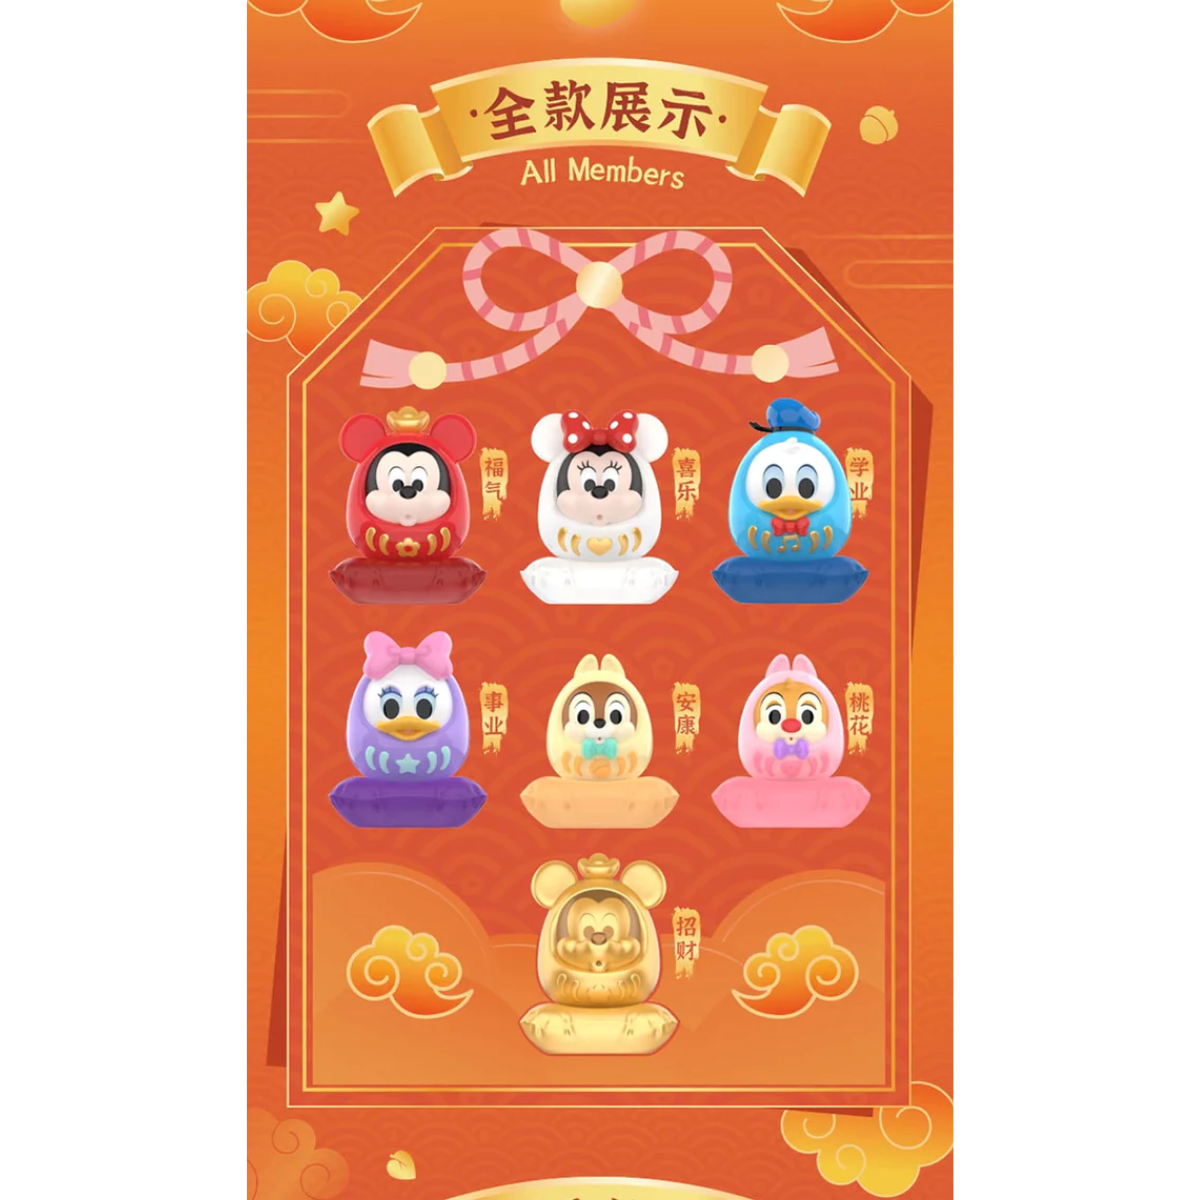 Top Toy x Mickey Mouse Family Dharma Series-Single Box (Random)-TopToy-Ace Cards & Collectibles